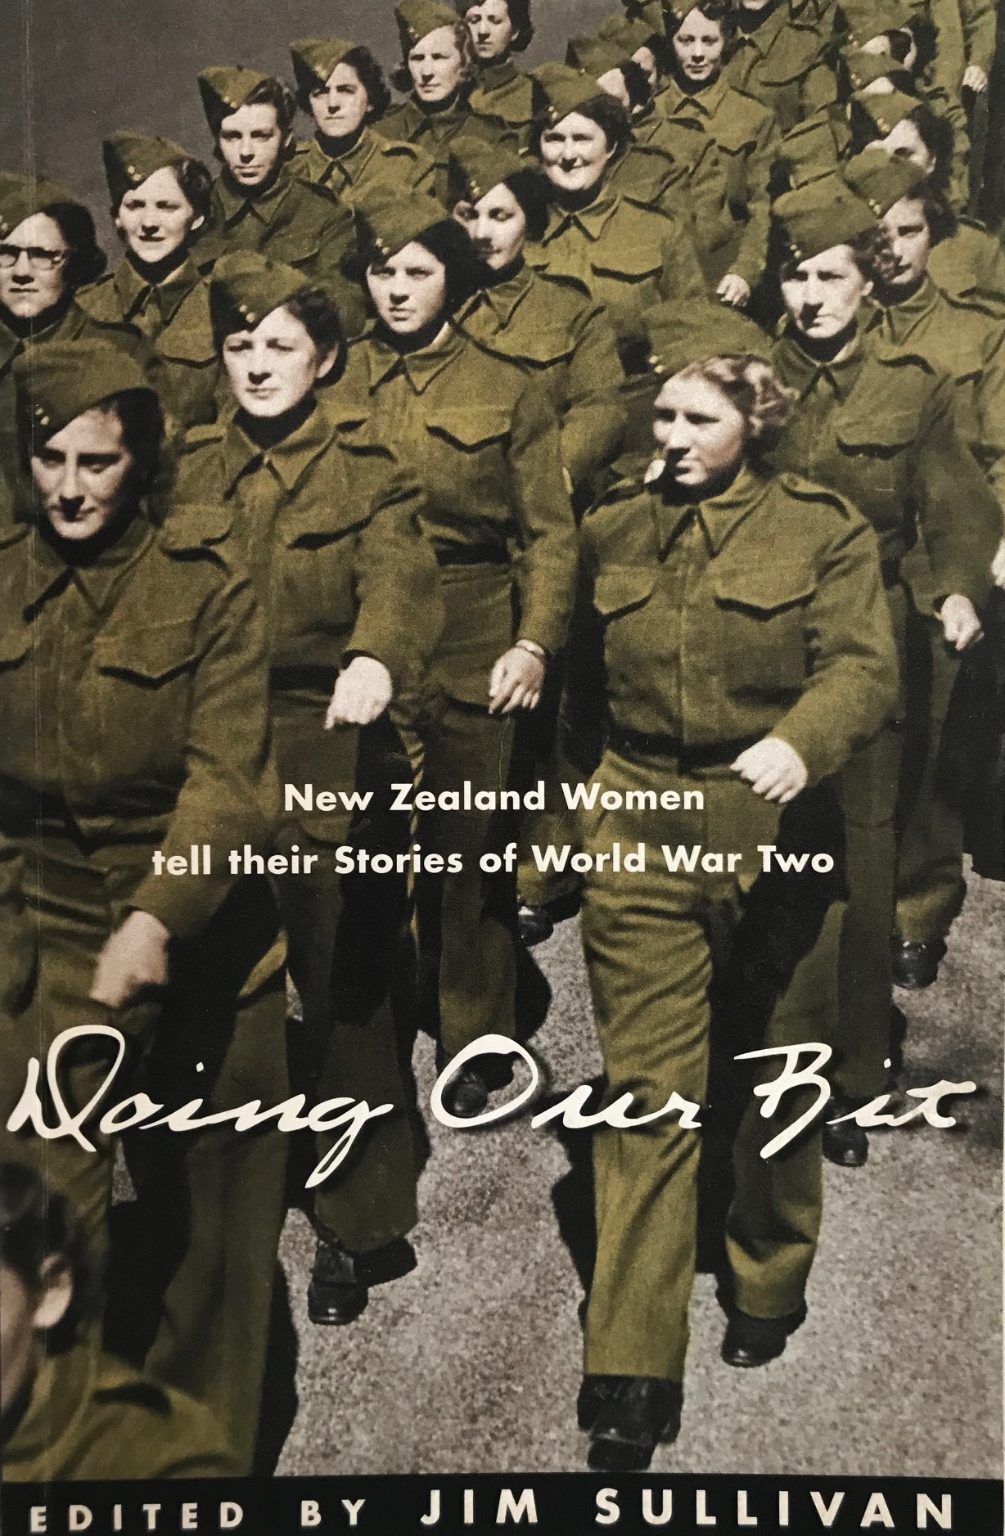 DOING OUR BIT: New Zealand Women Tell Their Stories of World War Two